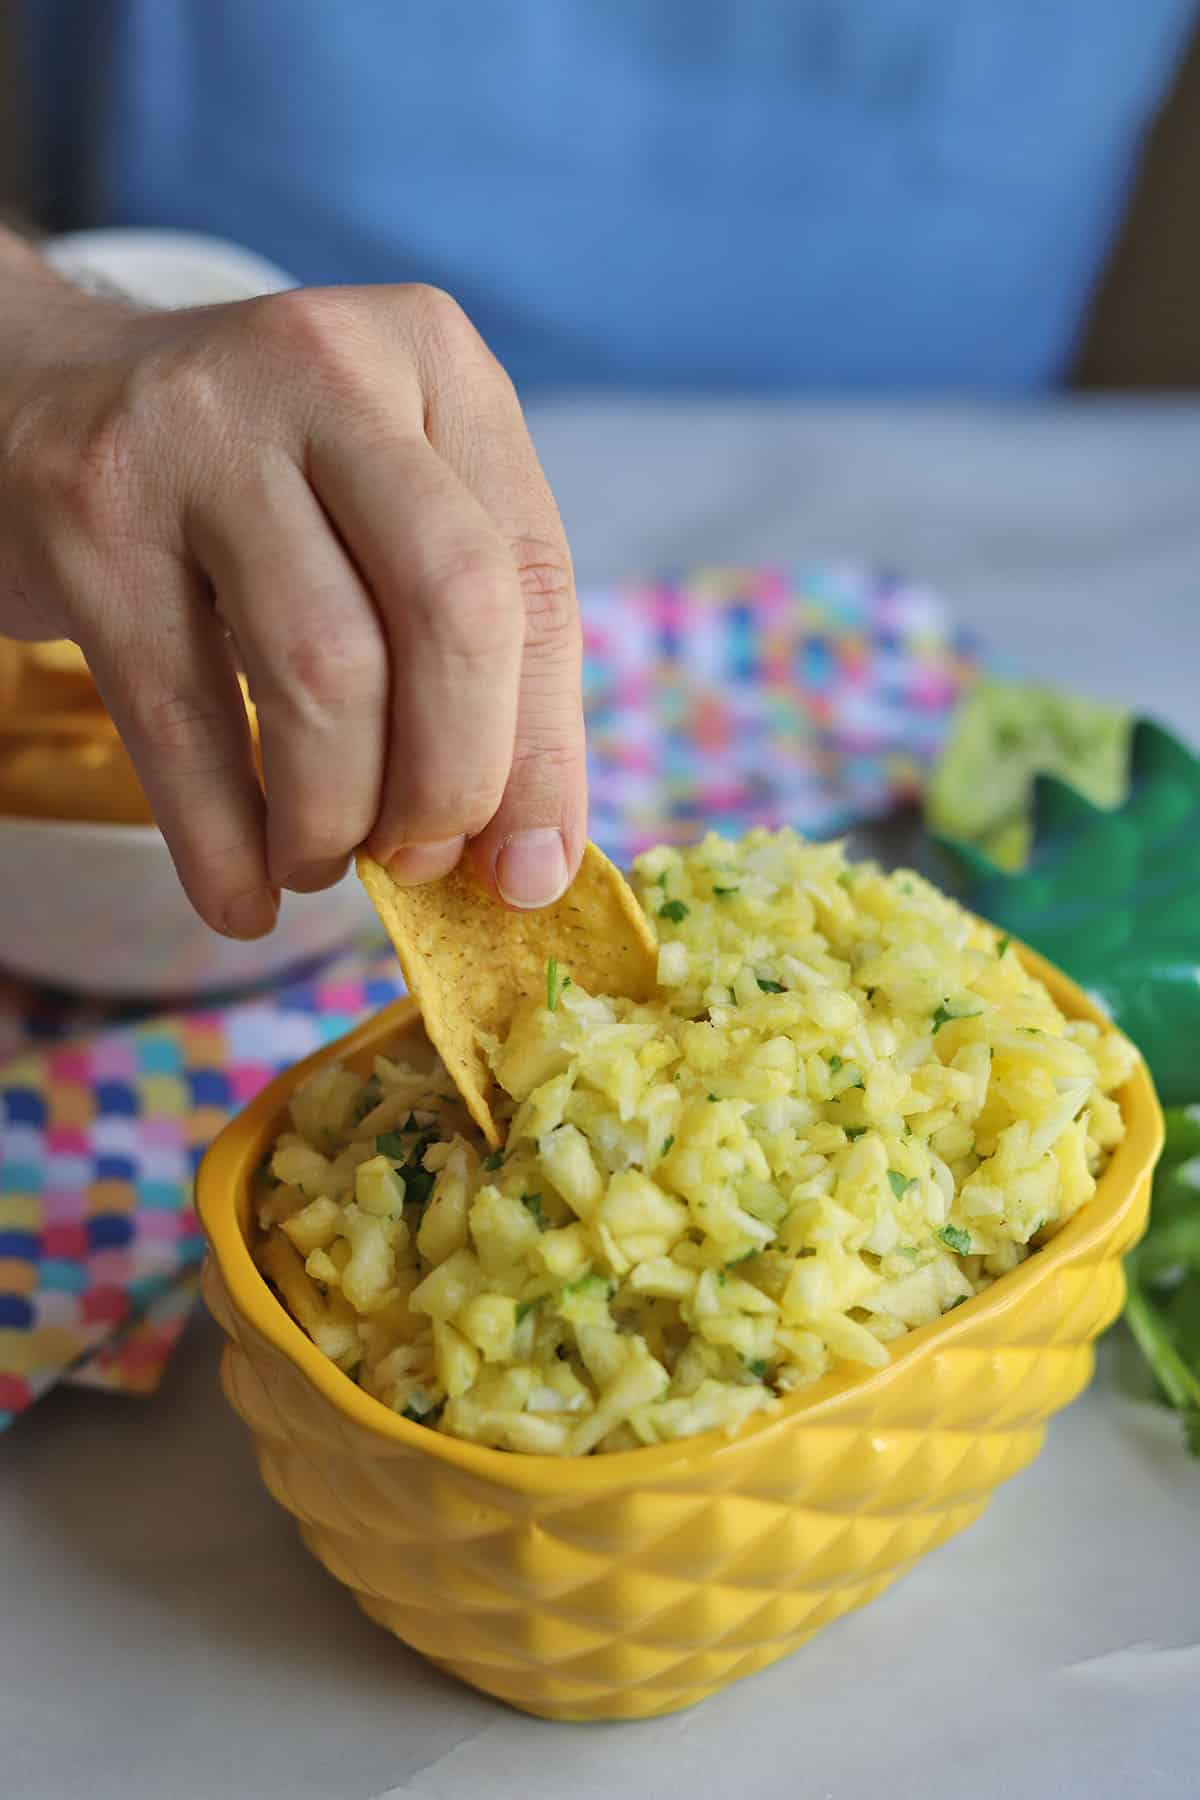 Tortilla chip being dipped into pineapple salsa.